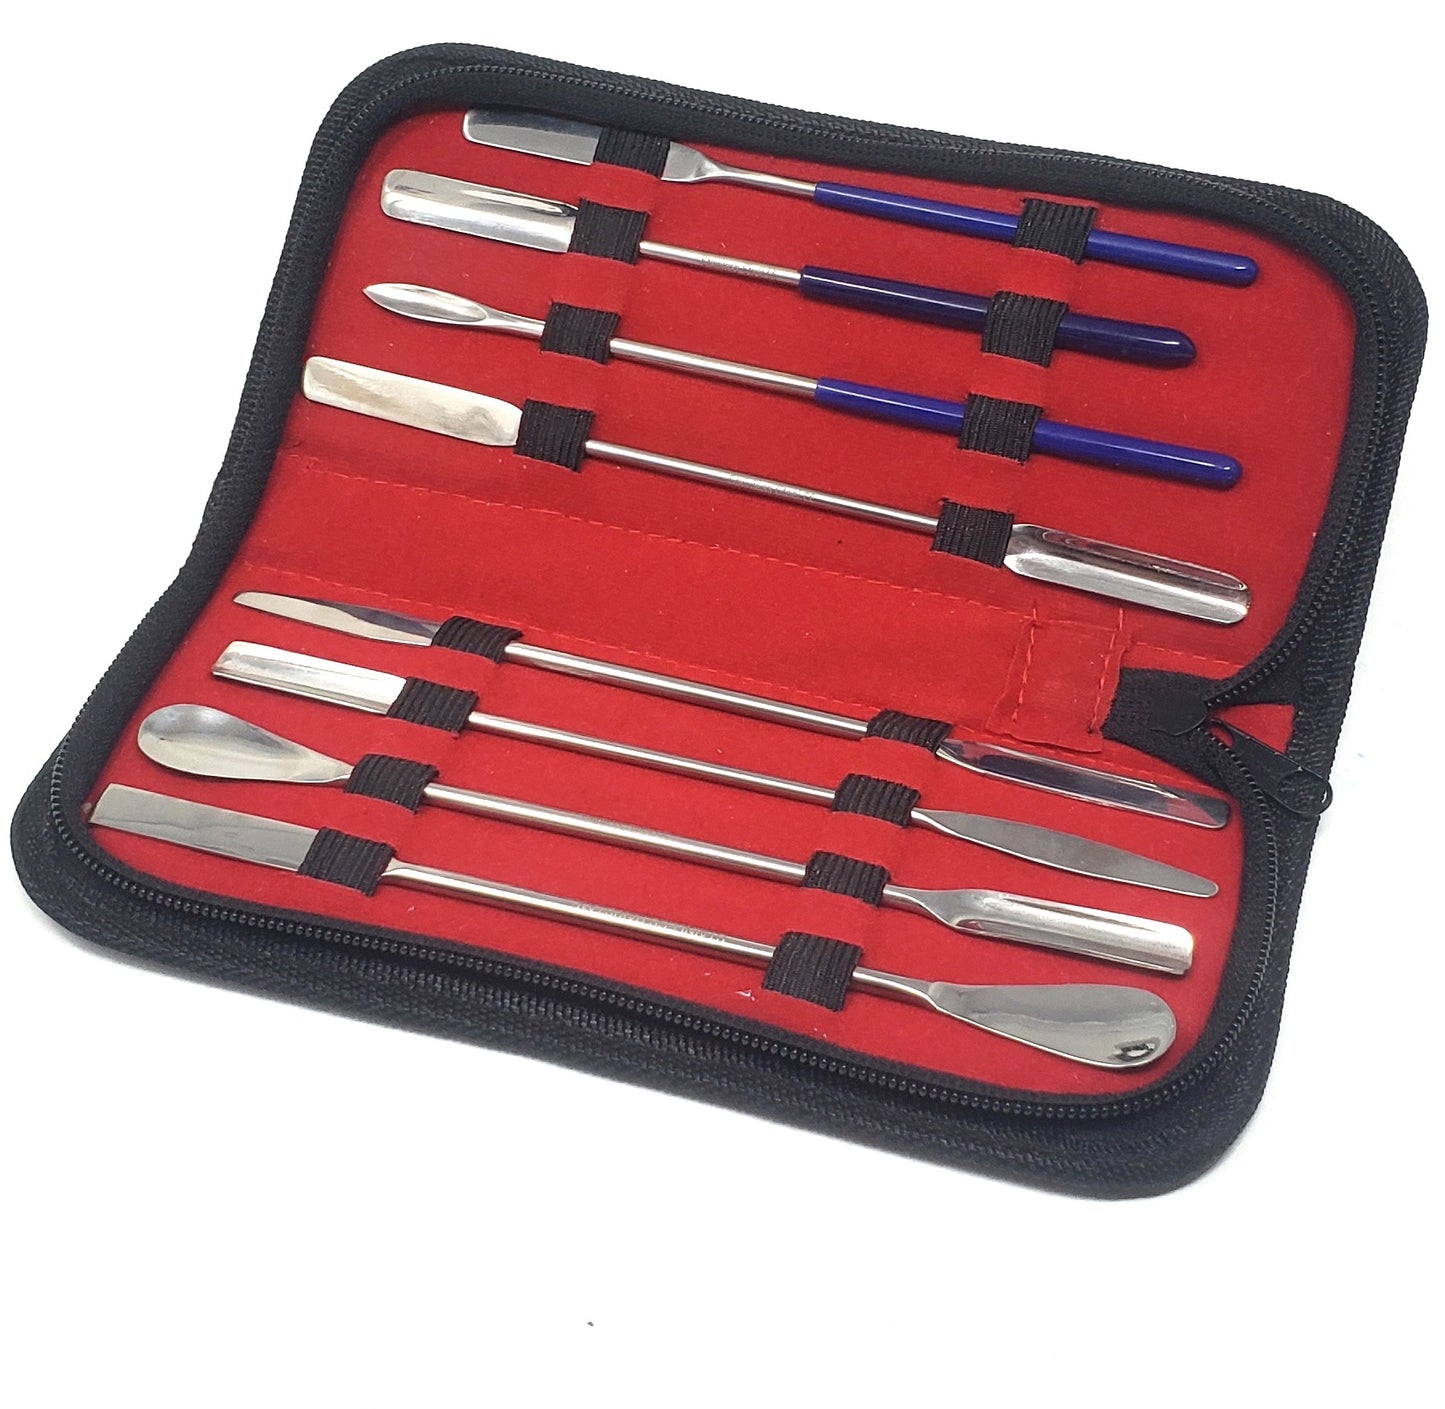 Stainless Steel Lab Spatula Set in a Carrying Case - 8 Pcs Edition